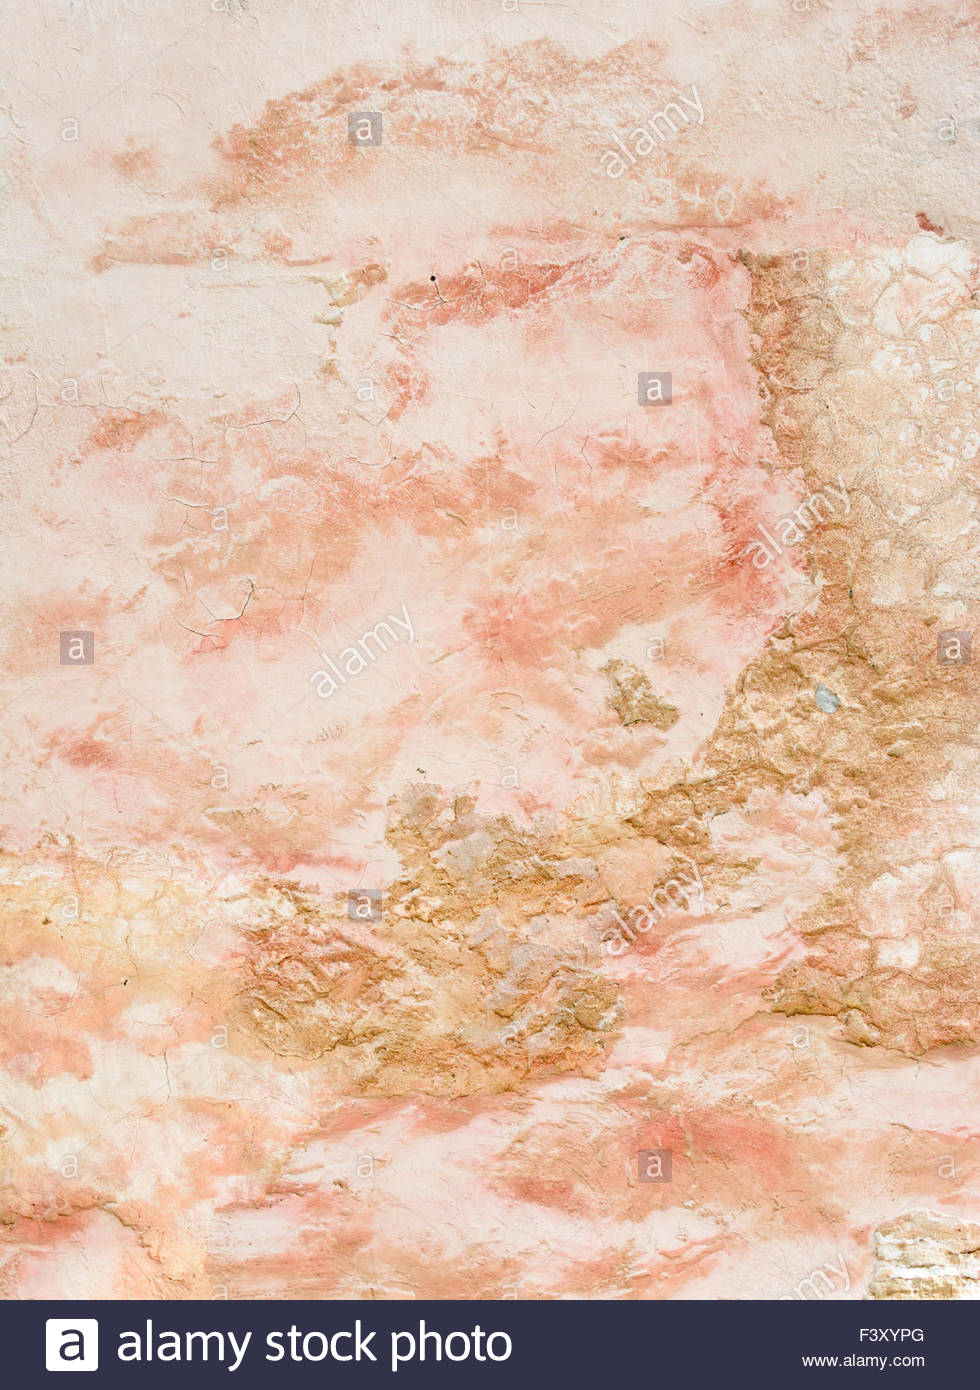 Earthy Background In Warm Colors Stock Photo